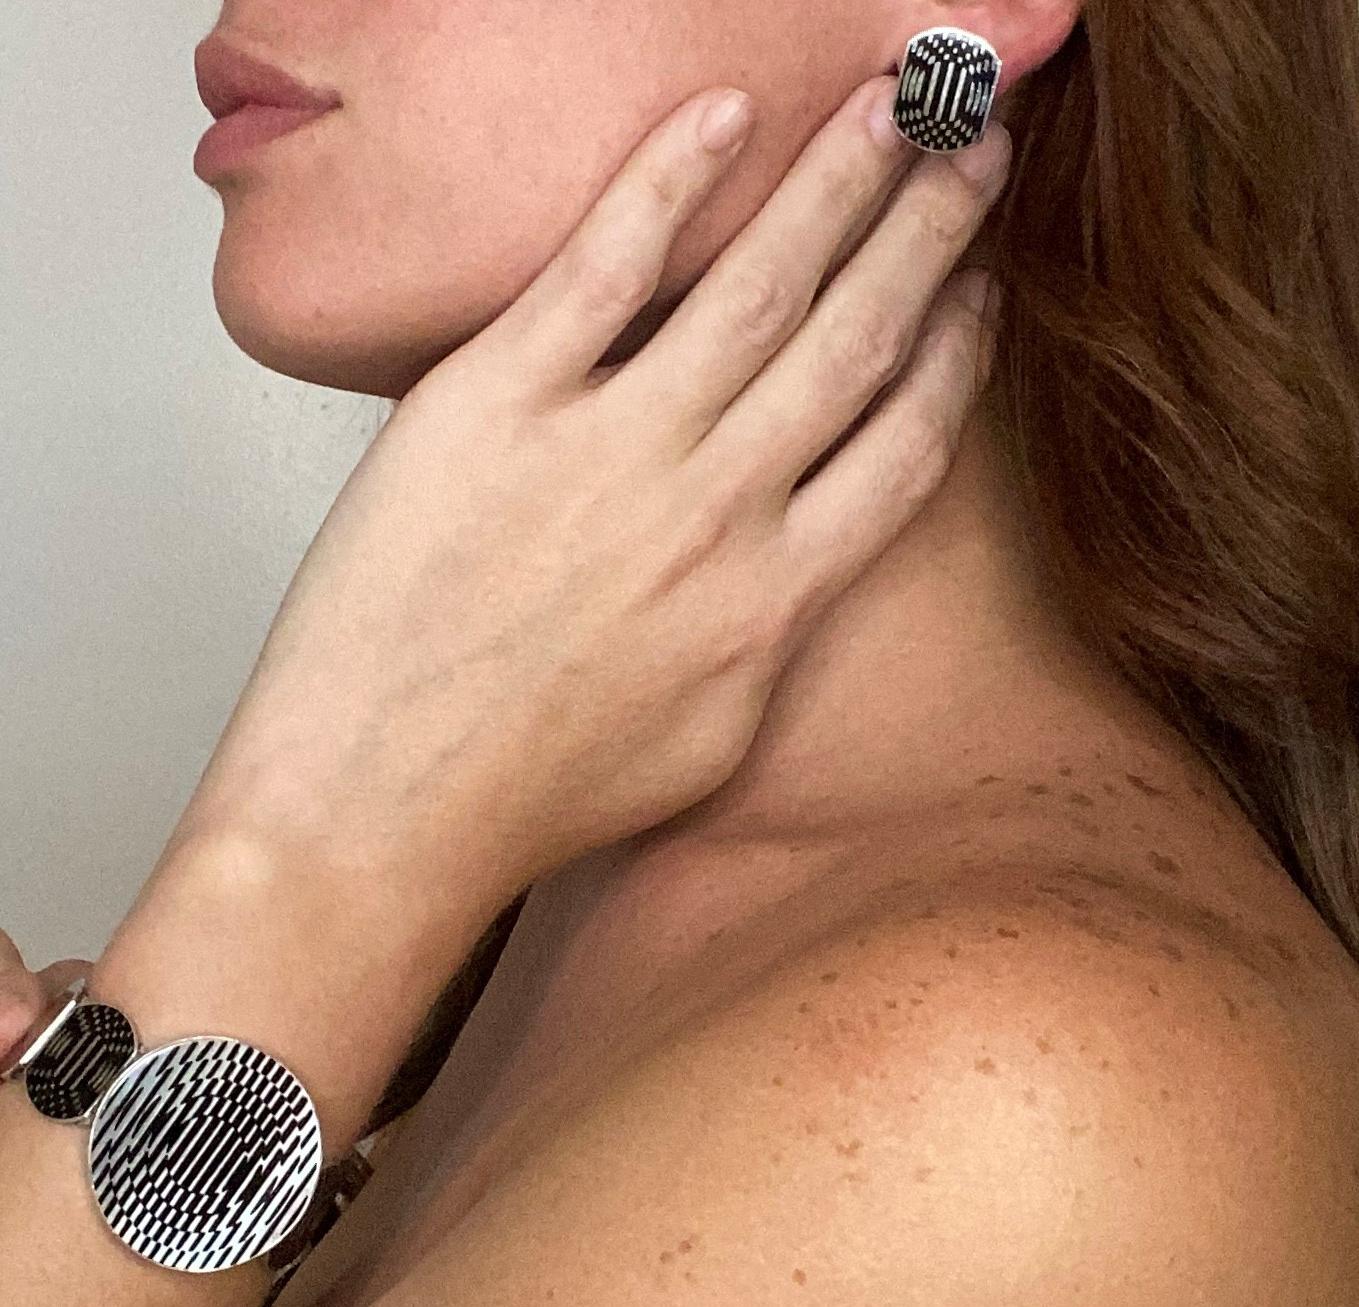 An Op-art Geometric earrings designed by Victor Vasarely (1906-1997).

Beautiful wearable pieces of art, created in London England by the Op-art artist Victor Vasarely. This very rare sculptural pair of earrings has been carefully crafted in solid